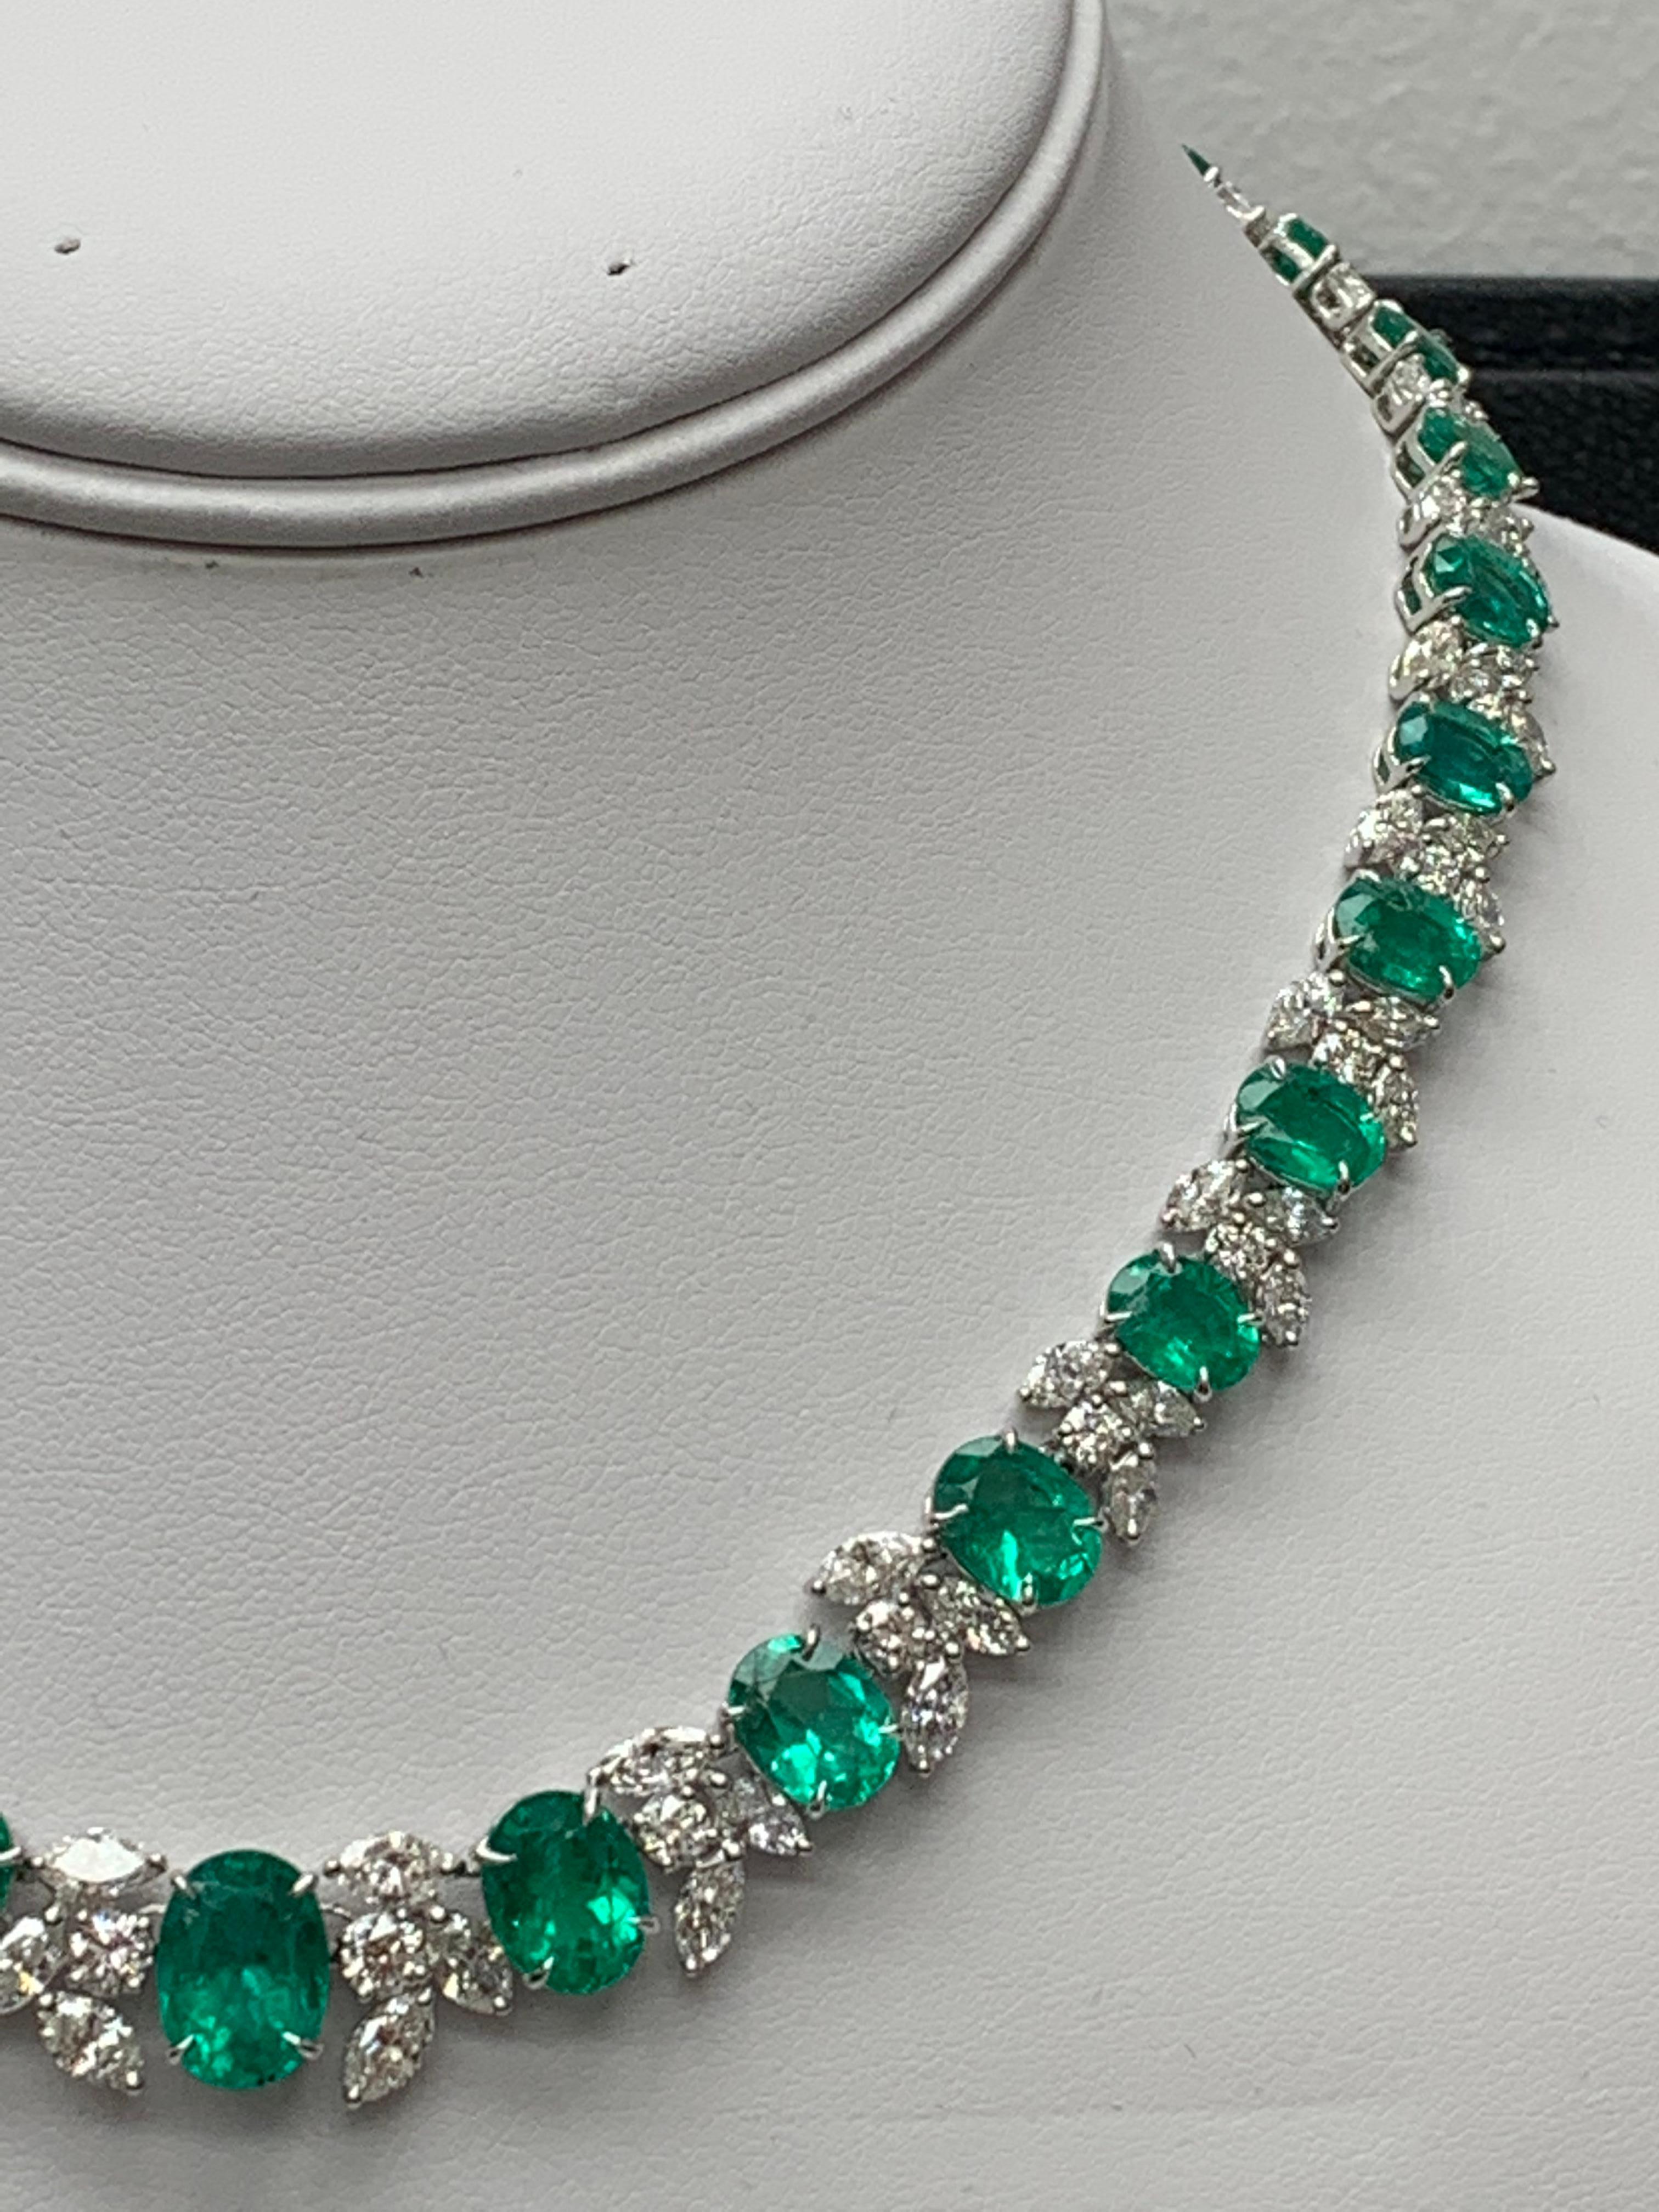 Oval Cut 36.87 Carat Emerald and White mixed cut Diamond Necklace in 18k White Gold For Sale